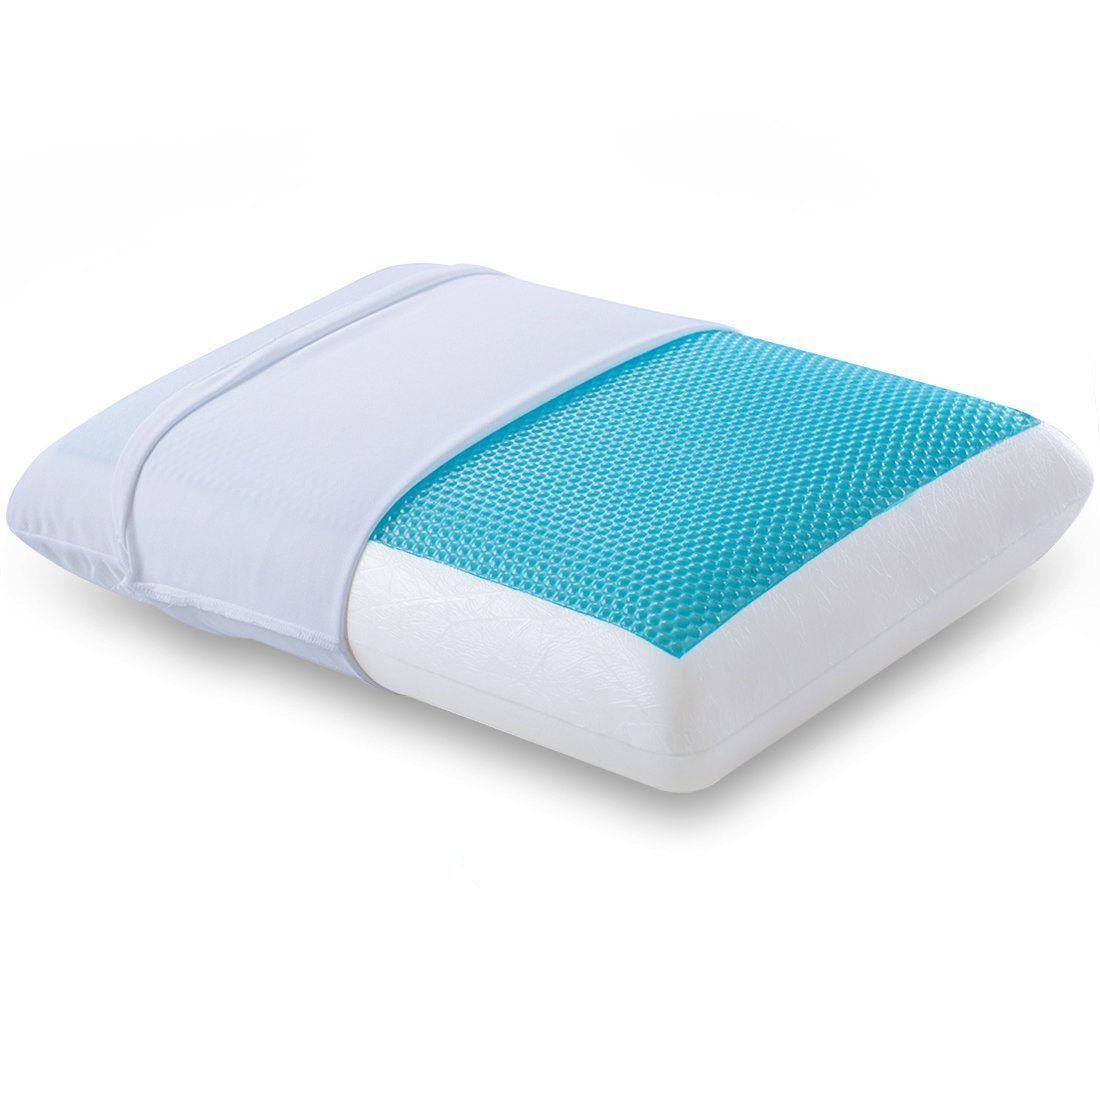 12 Best Memory Foam Pillows With Cooling Gel â Page 1065 â Reviews ...